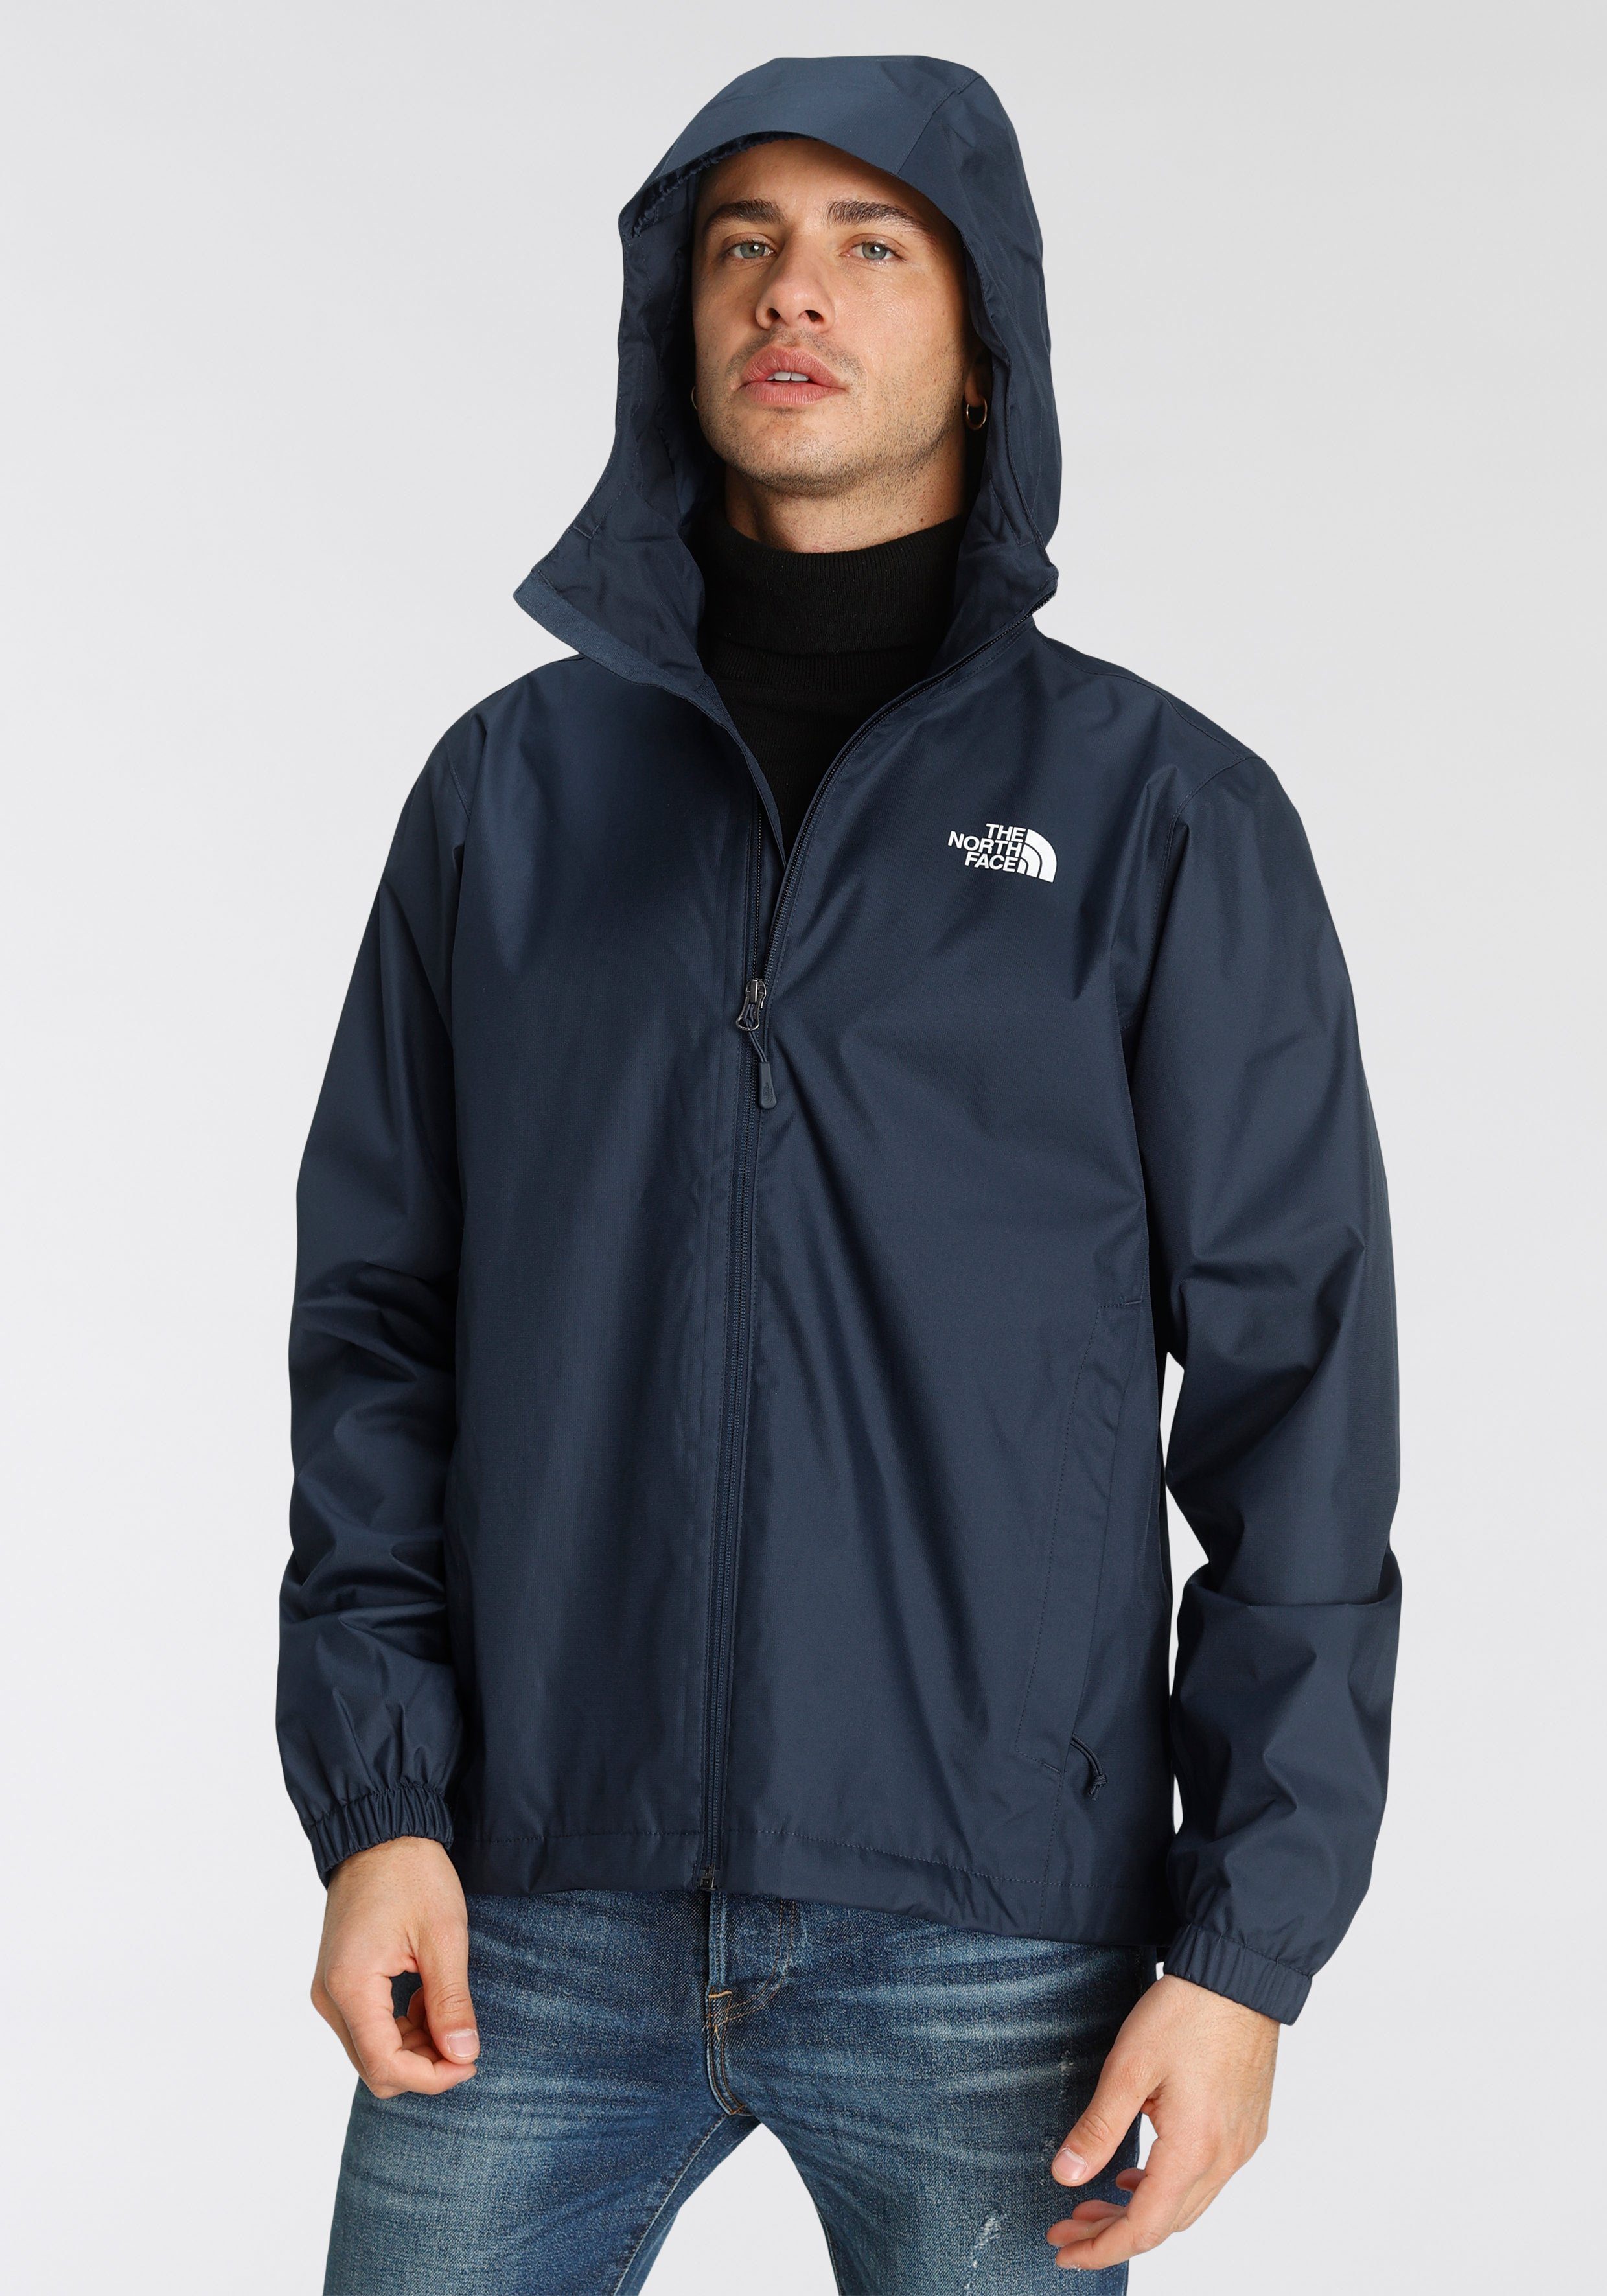 The North Face Funktionsjacke »MEN´S QUEST JACKET« | OTTO